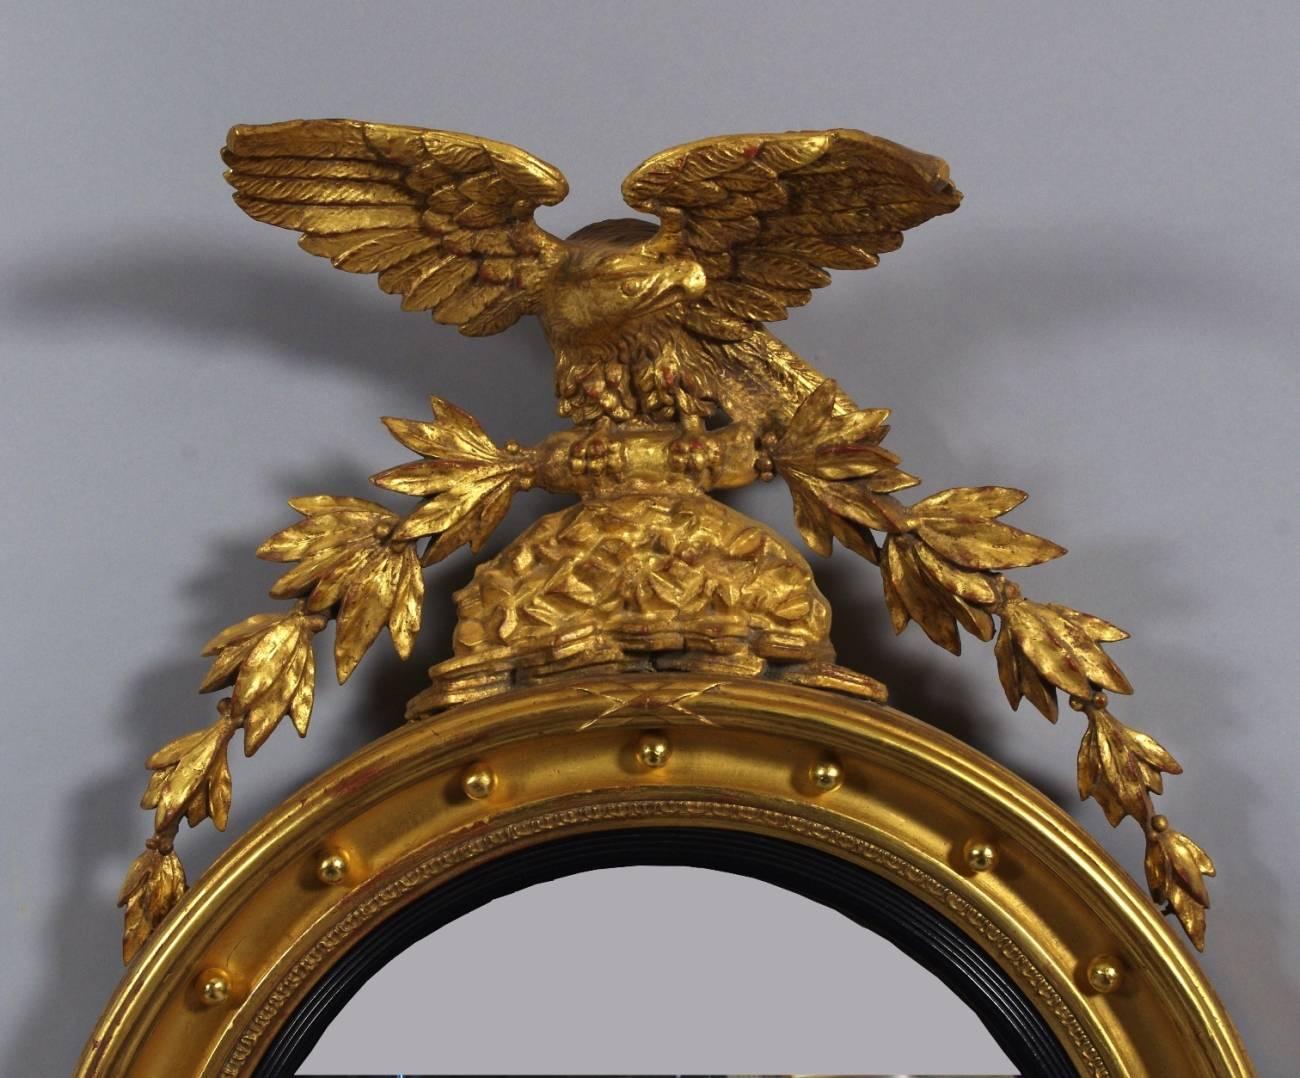 Regency carved and giltwood convex mirror, the crest surmounted by an eagle with out-stretched wings on a rocky outcrop, a bundle of laurel branches in its claws, the frame with gilt balls and ebonized liner surrounding the convex mirror.